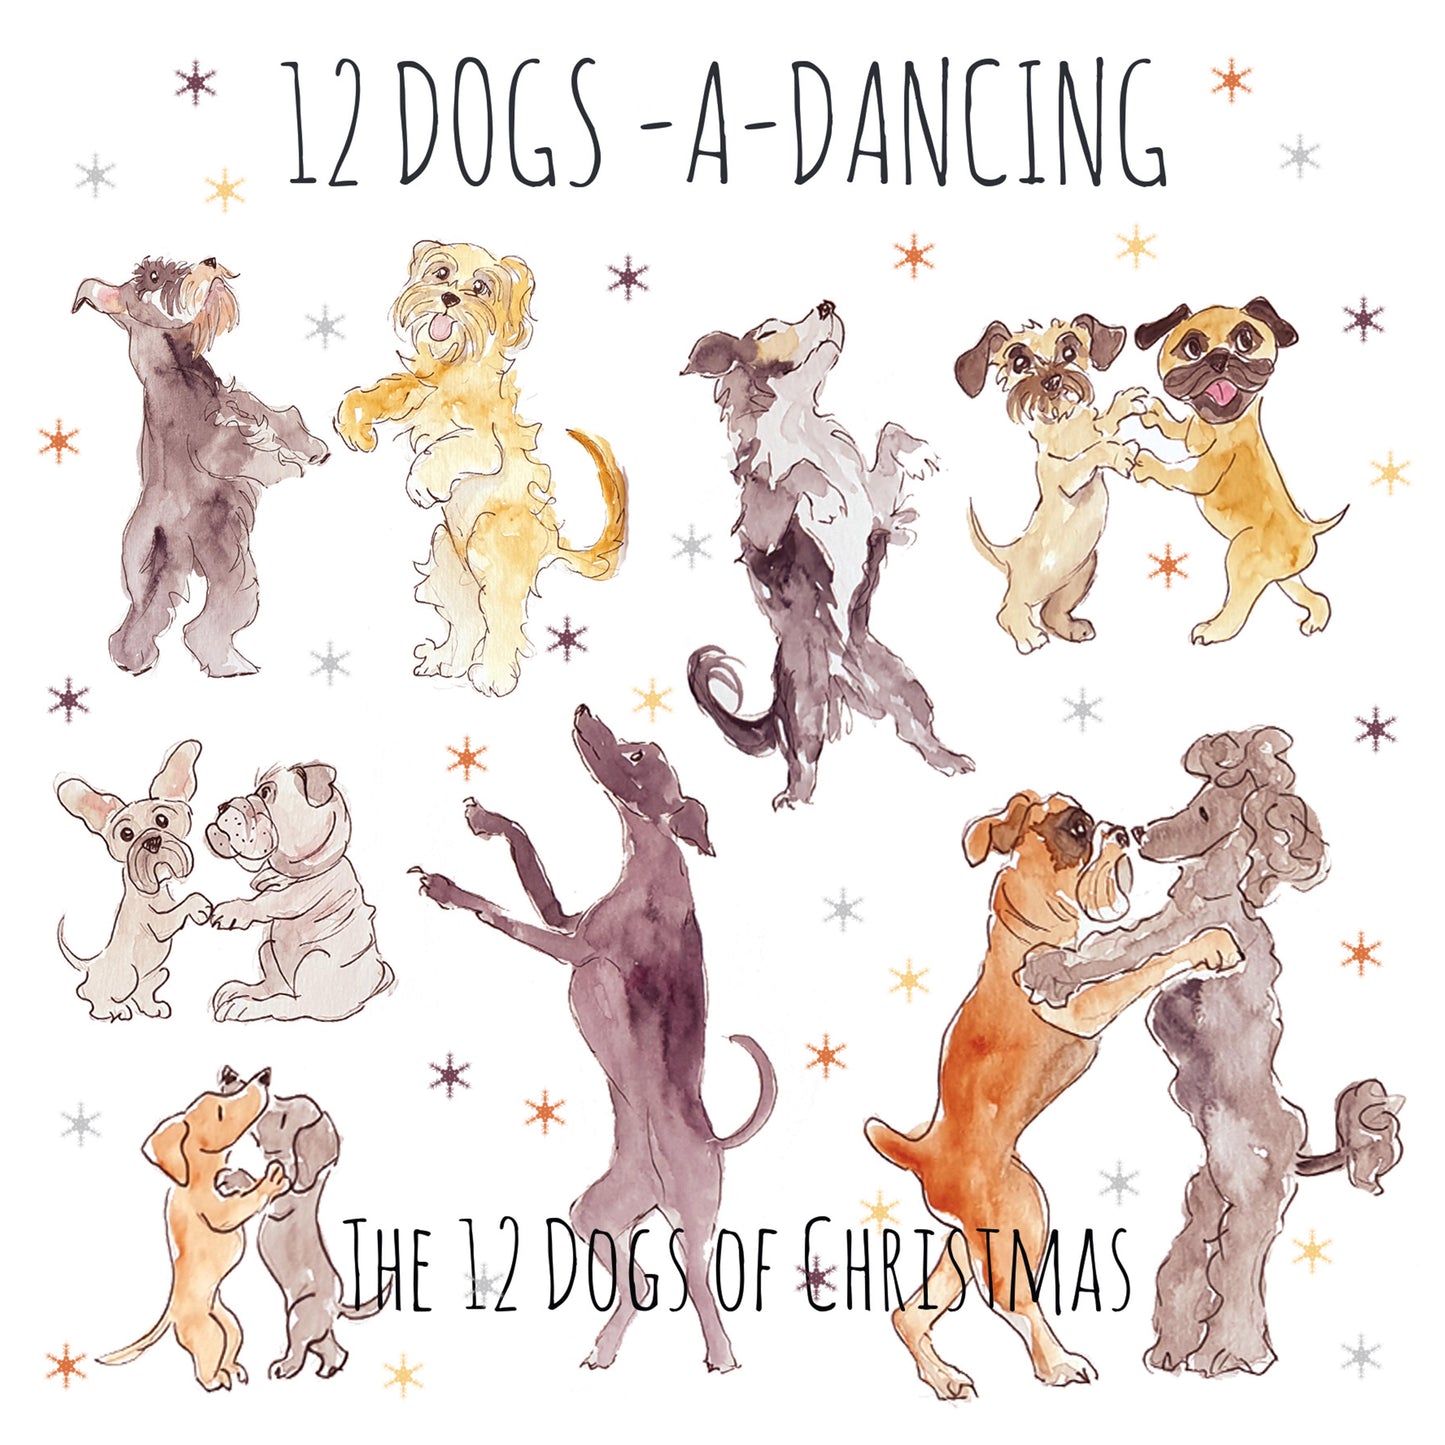 12 Dogs-a-Dancing - Greeting Card